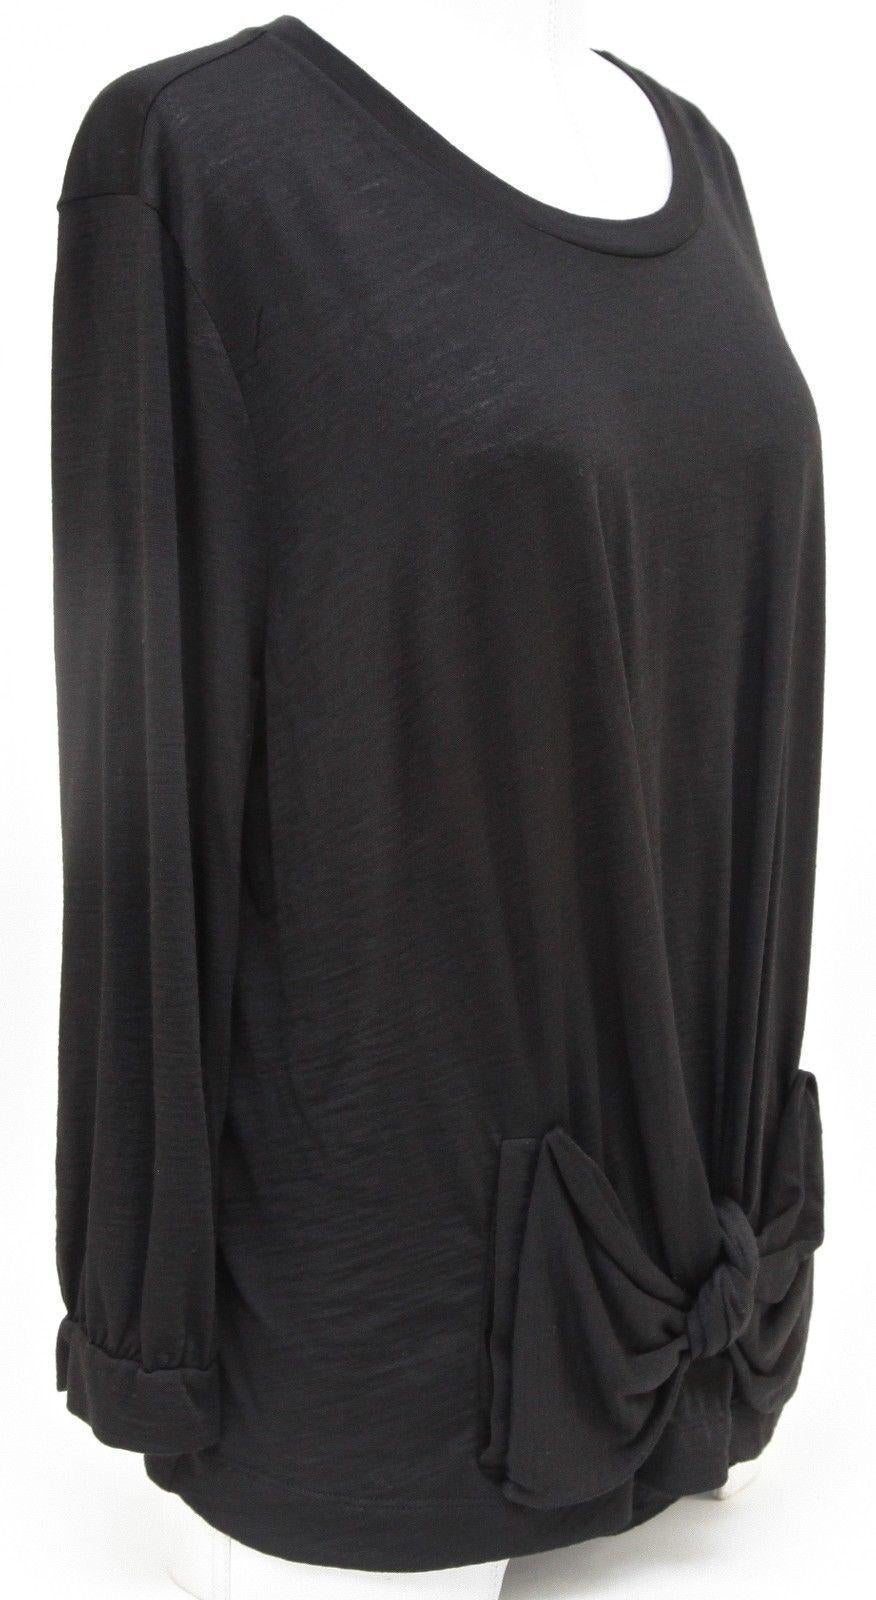 GUARANTEED AUTHENTIC SEE BY CHLOE 3/4 SLEEVE LENGTH BLACK SWEATER


Design:
 - 3/4 sleeve length black knit sweater in a classic black color.
 - Scoop neck.
 - Knot detail gathered at lower front of sweater.
 - Slip on, unlined.

Material: 60%